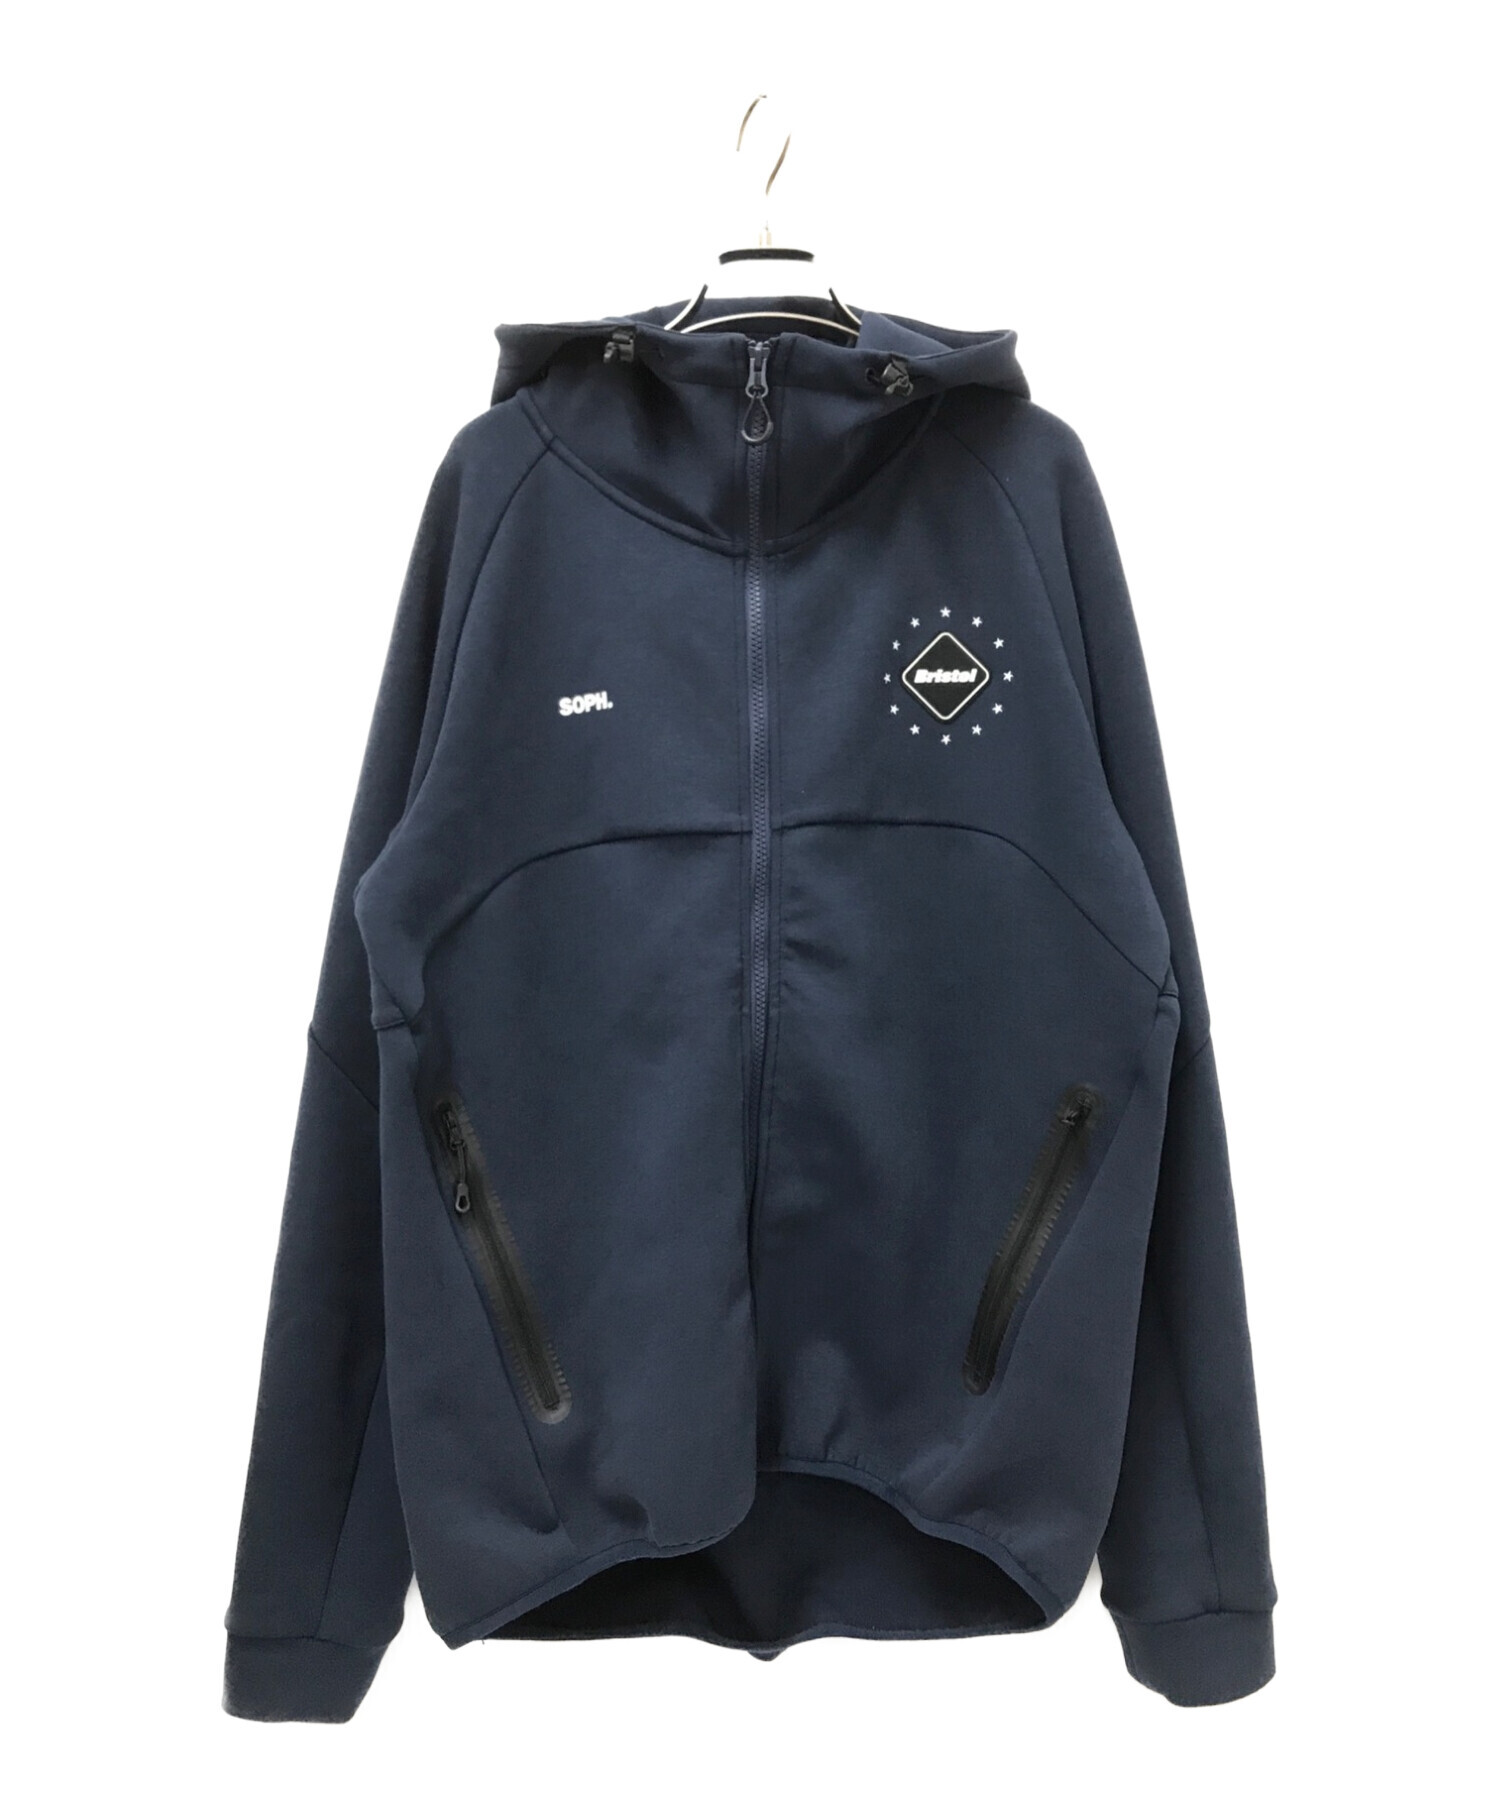 fcrb ventilation hoodie - トップス